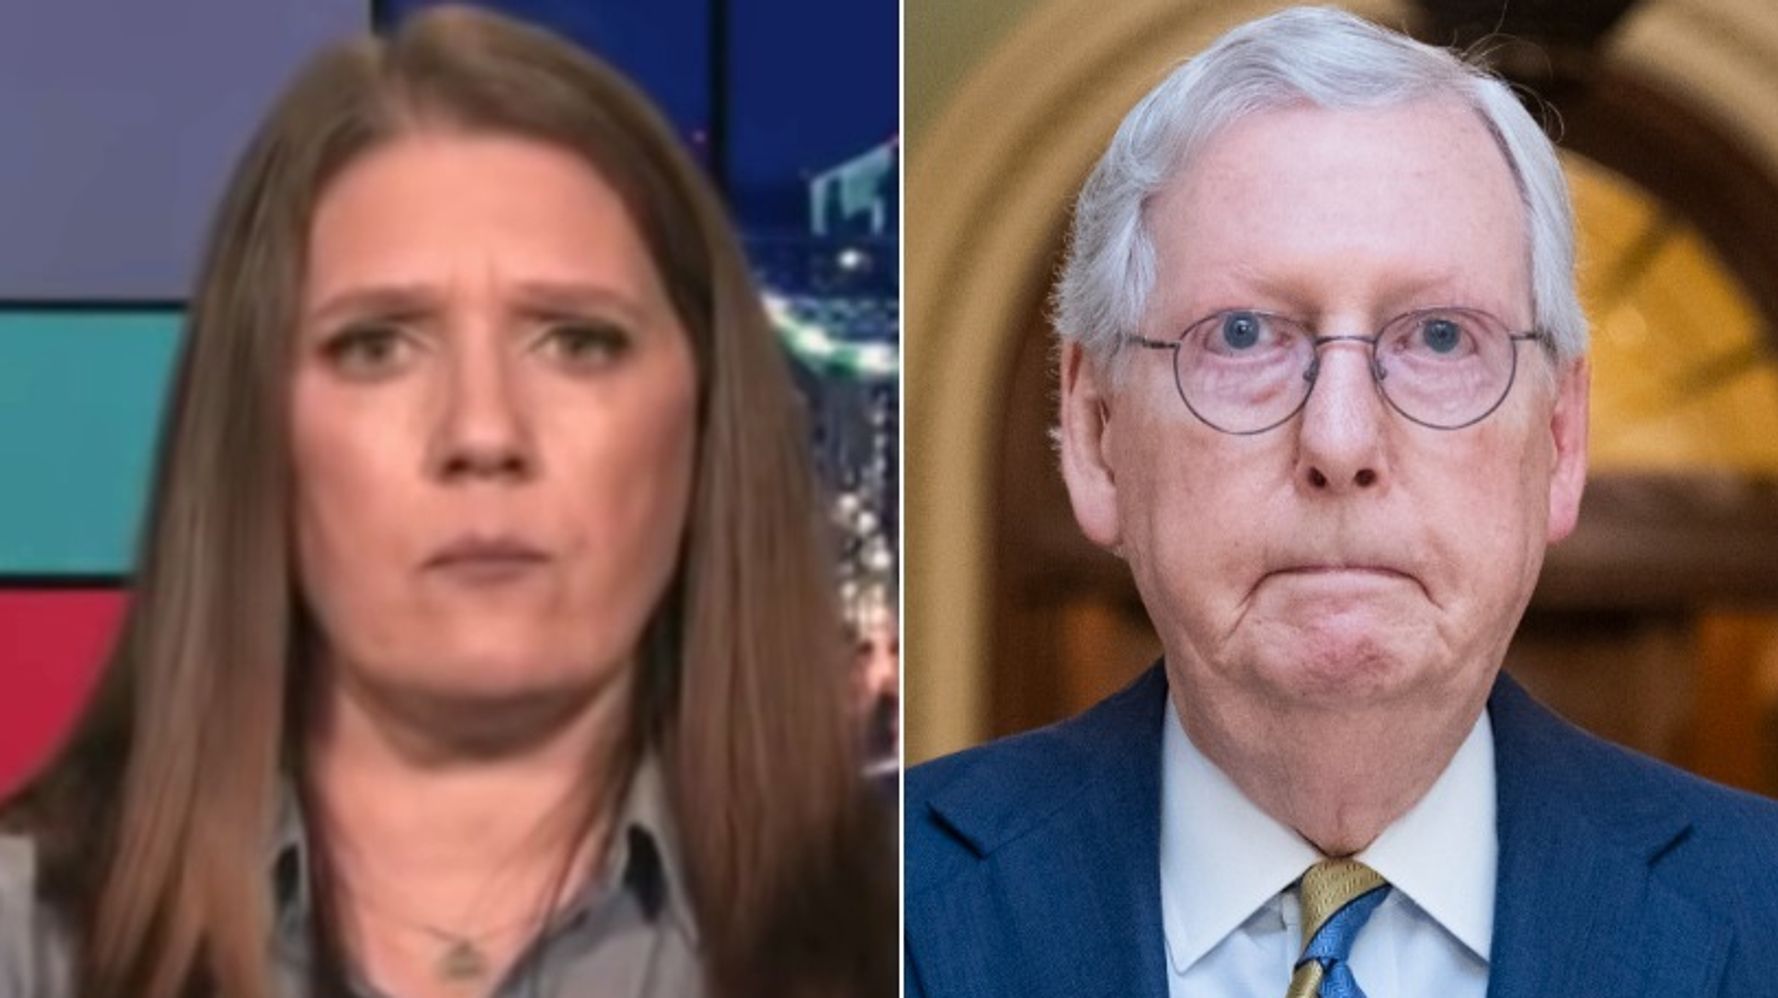 Mary Trump Rips McConnell As ‘Greatest Traitor’ Since Robert E. Lee, With 1 Difference